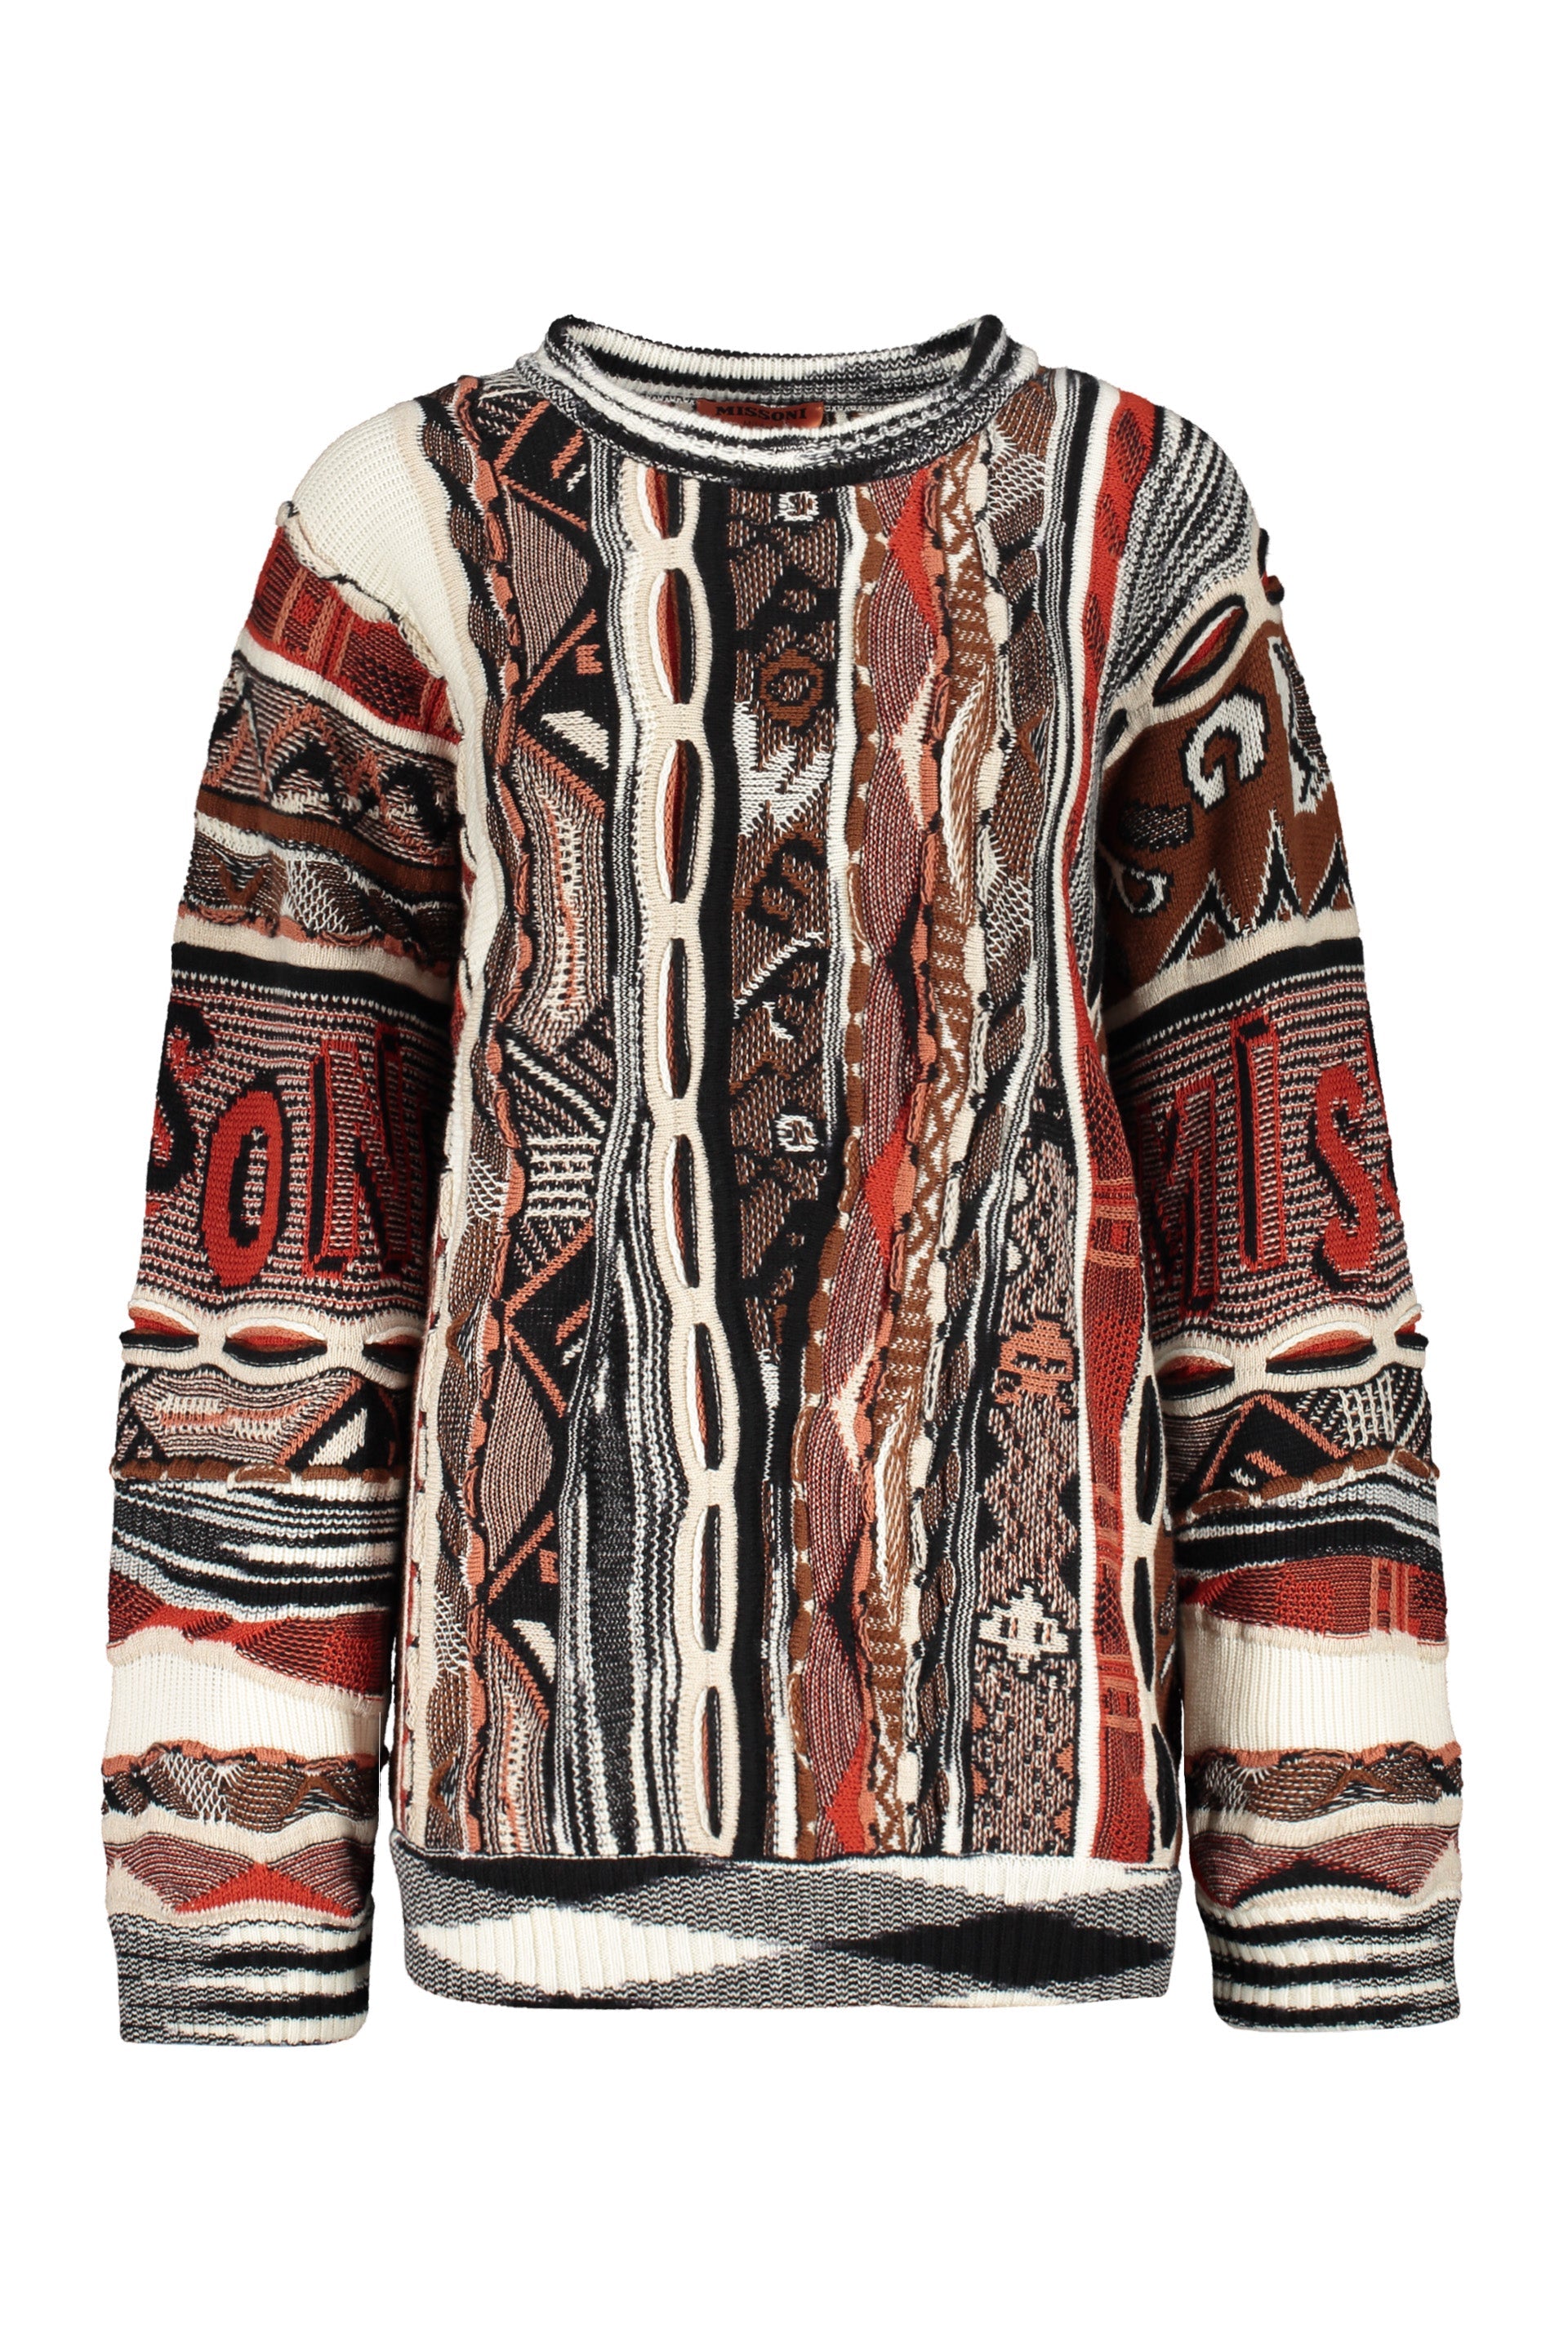 Missoni-OUTLET-SALE-Crew-neck-wool-sweater-Strick-S-ARCHIVE-COLLECTION.jpg